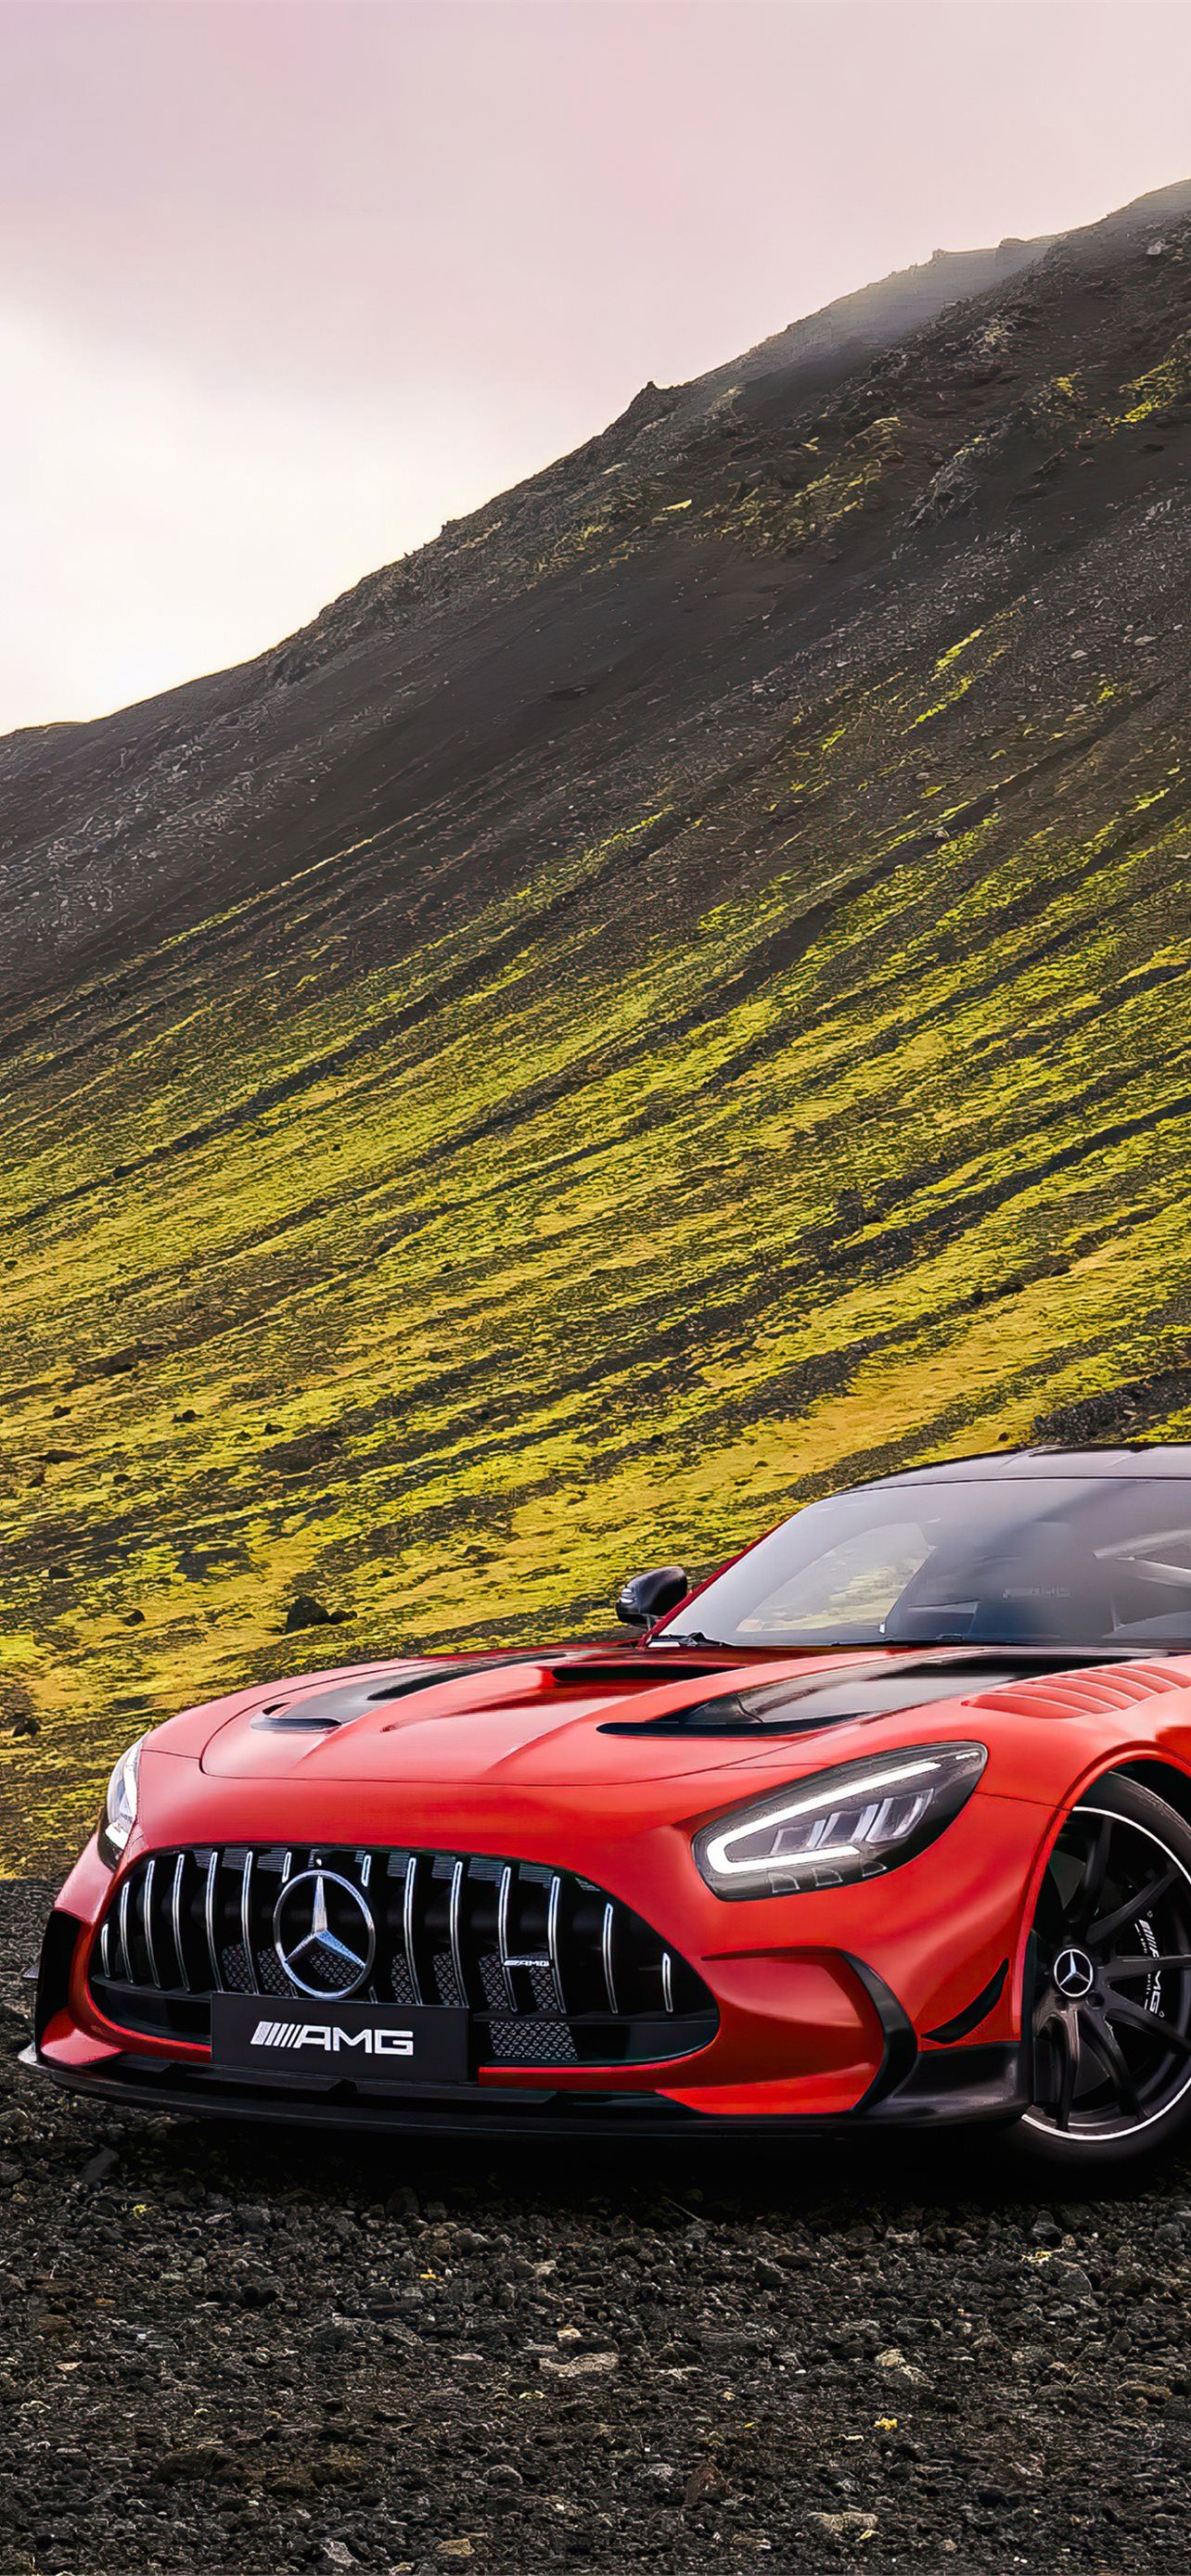 Amg Photos Download The BEST Free Amg Stock Photos  HD Images